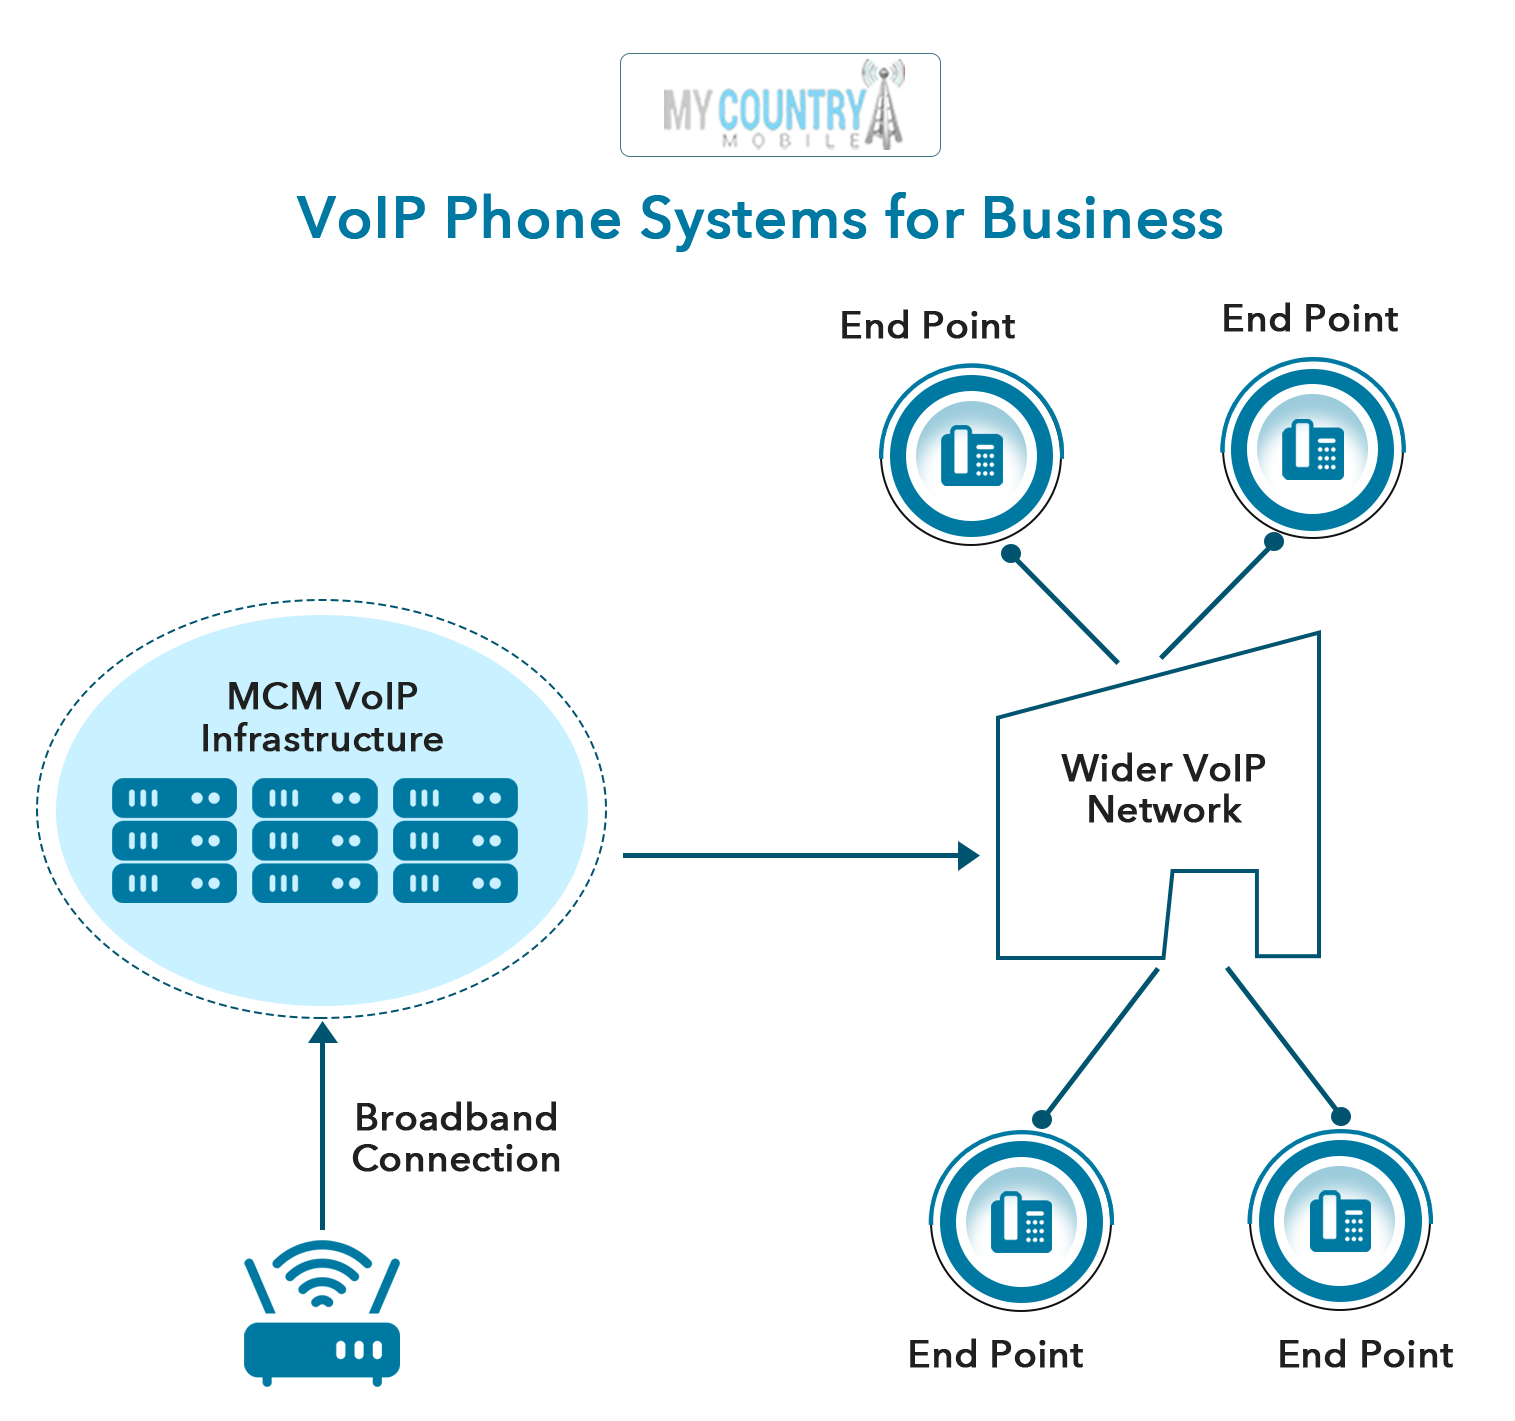 Why do small businesses need VoIP services?